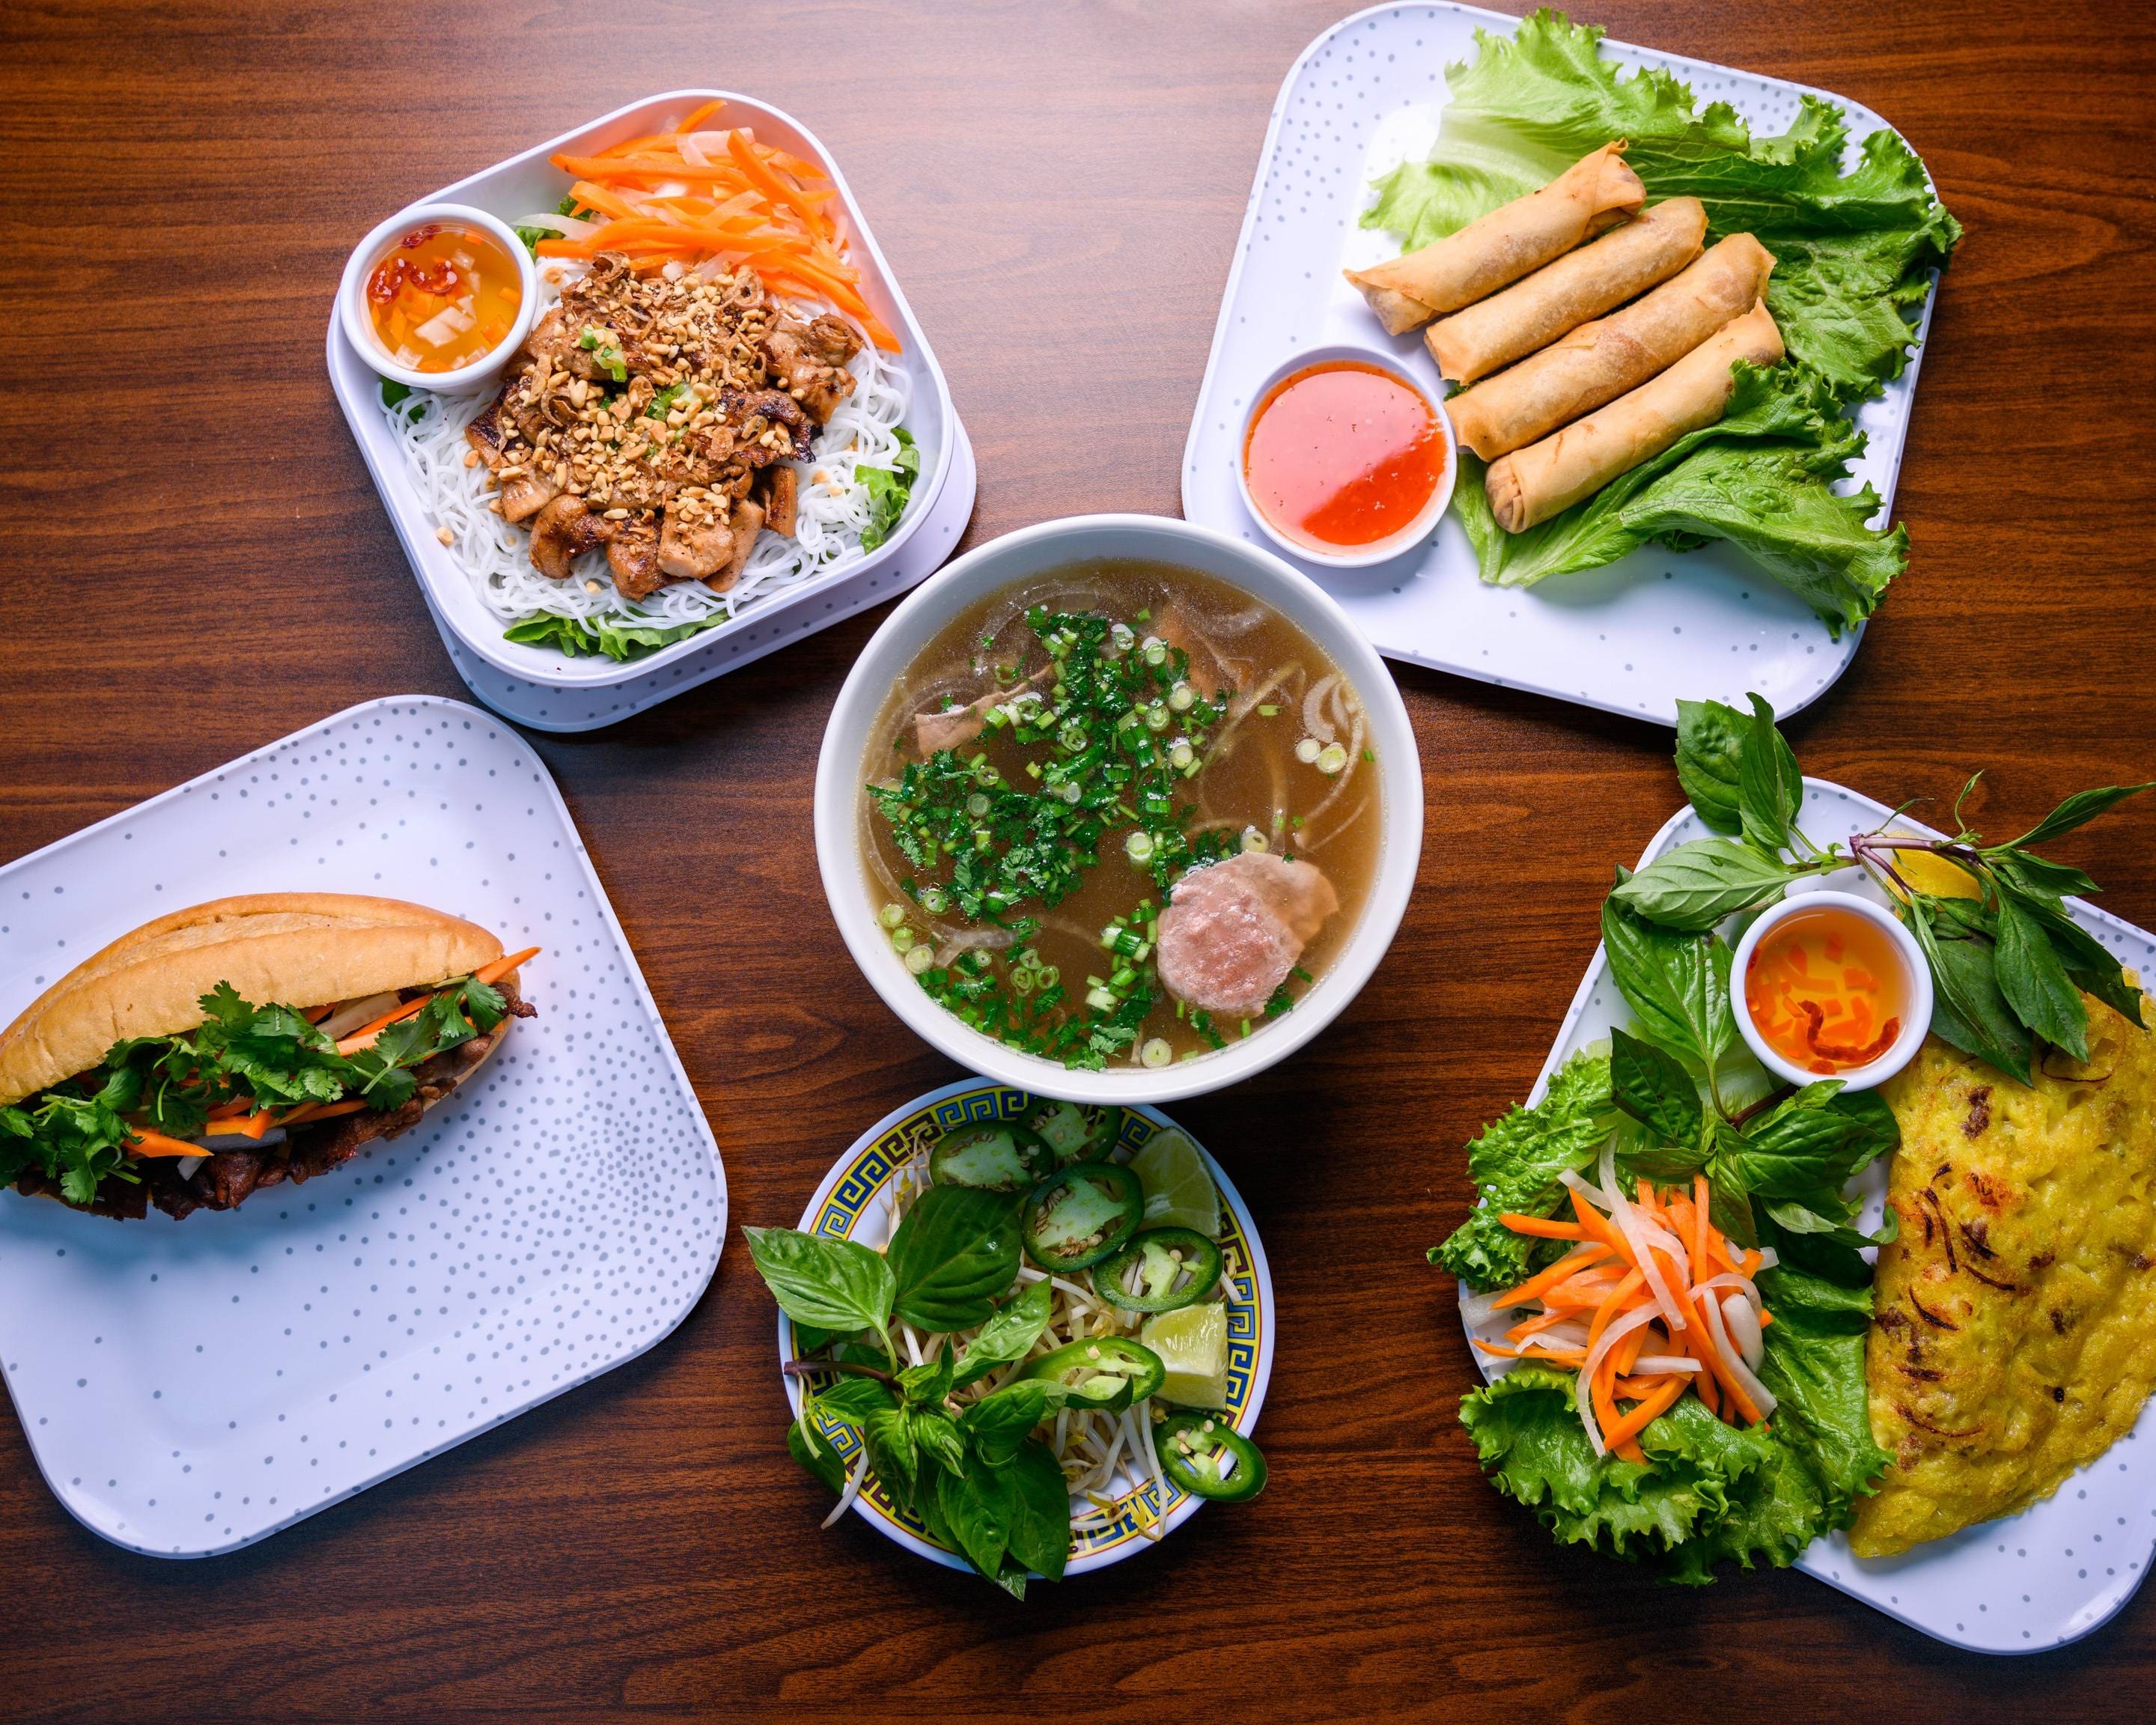 Vietnamese Food Table that includes Pho Noodle Soup, bun thit nuong, cha gio springroll, banh xeo, and bánh mì sandwich